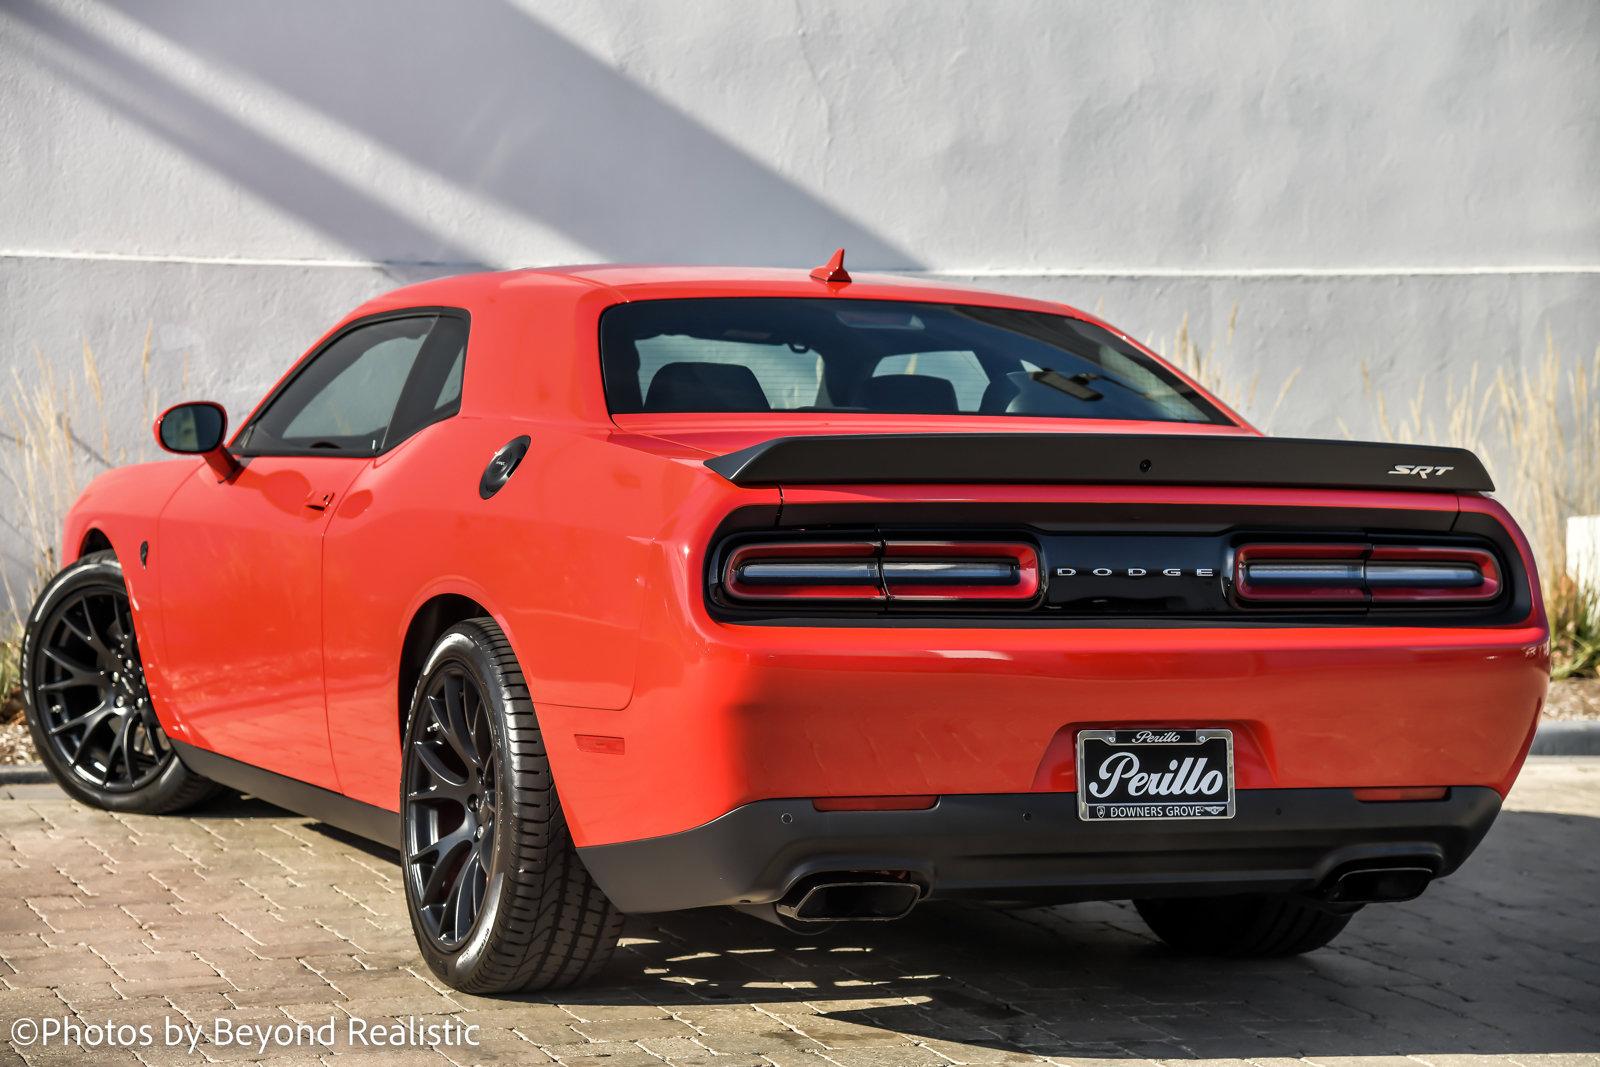 Used 2015 Dodge Challenger SRT Hellcat | Downers Grove, IL